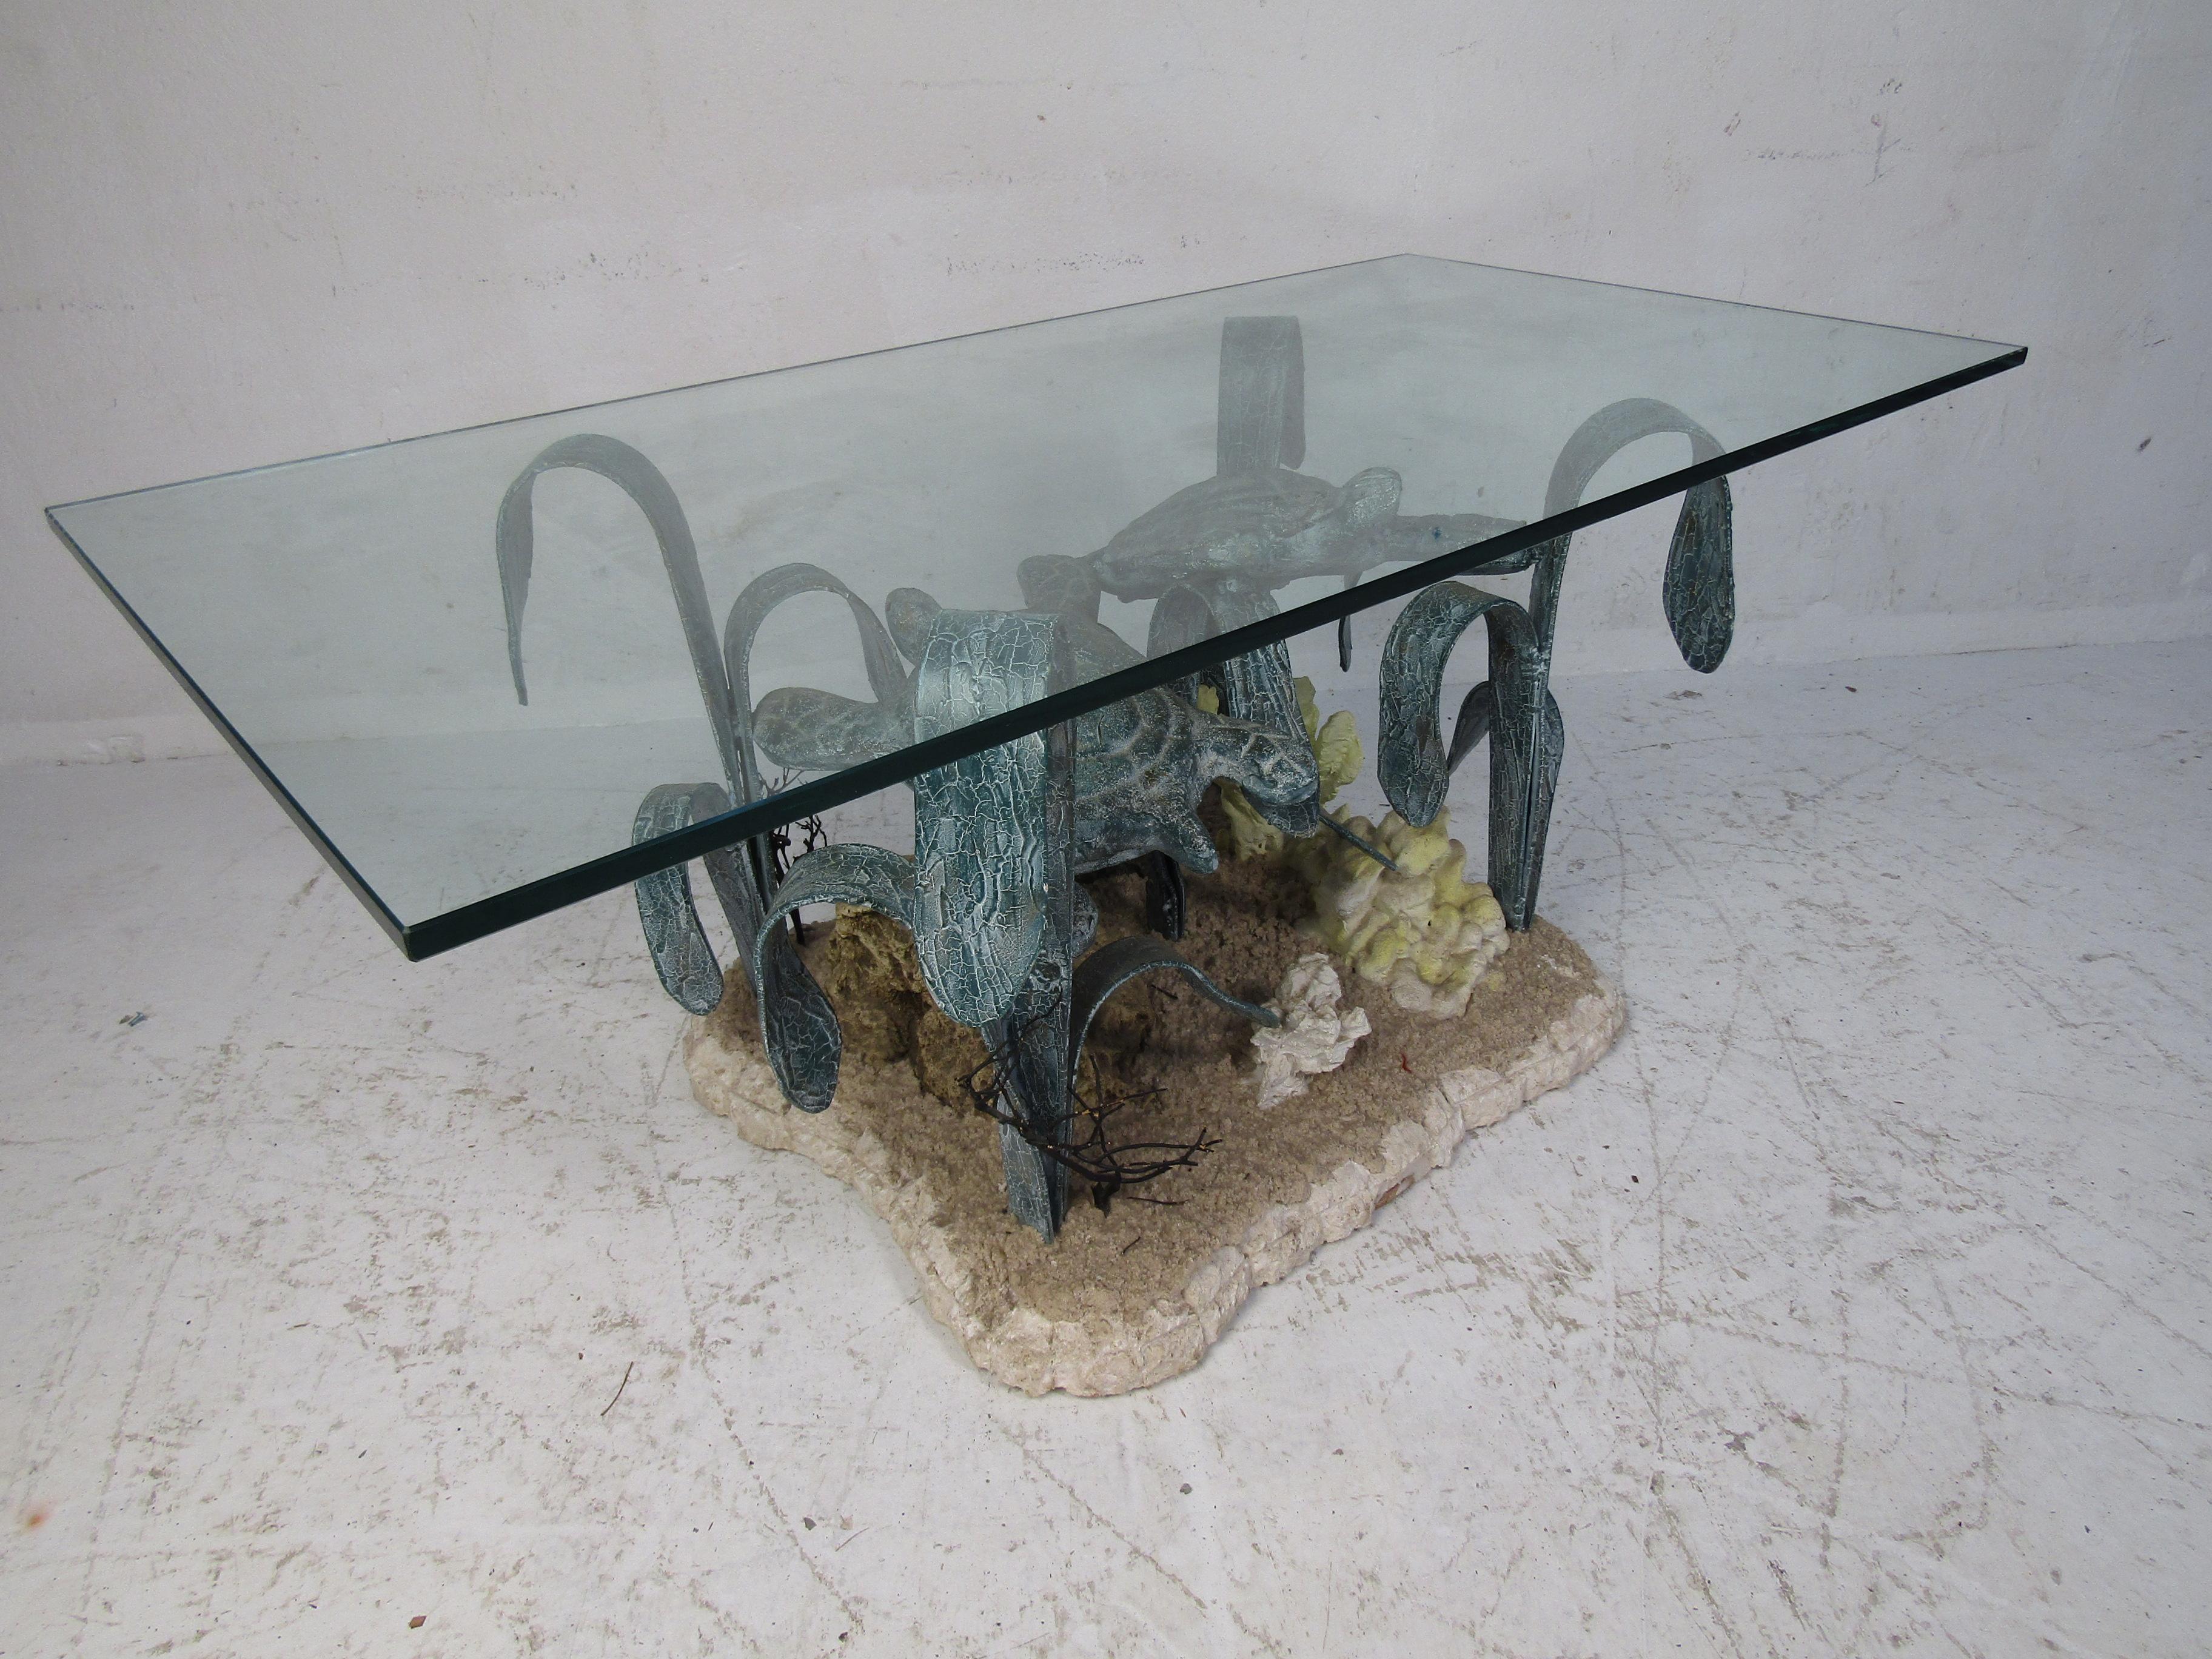 Elegant modern marine life coffee table with a glass top. Wonderful patinated base with sculptures of turtles and seaweed swimming above the coral. The 1/2 thick rectangular glass top offers plenty of room for guests while they gaze upon the